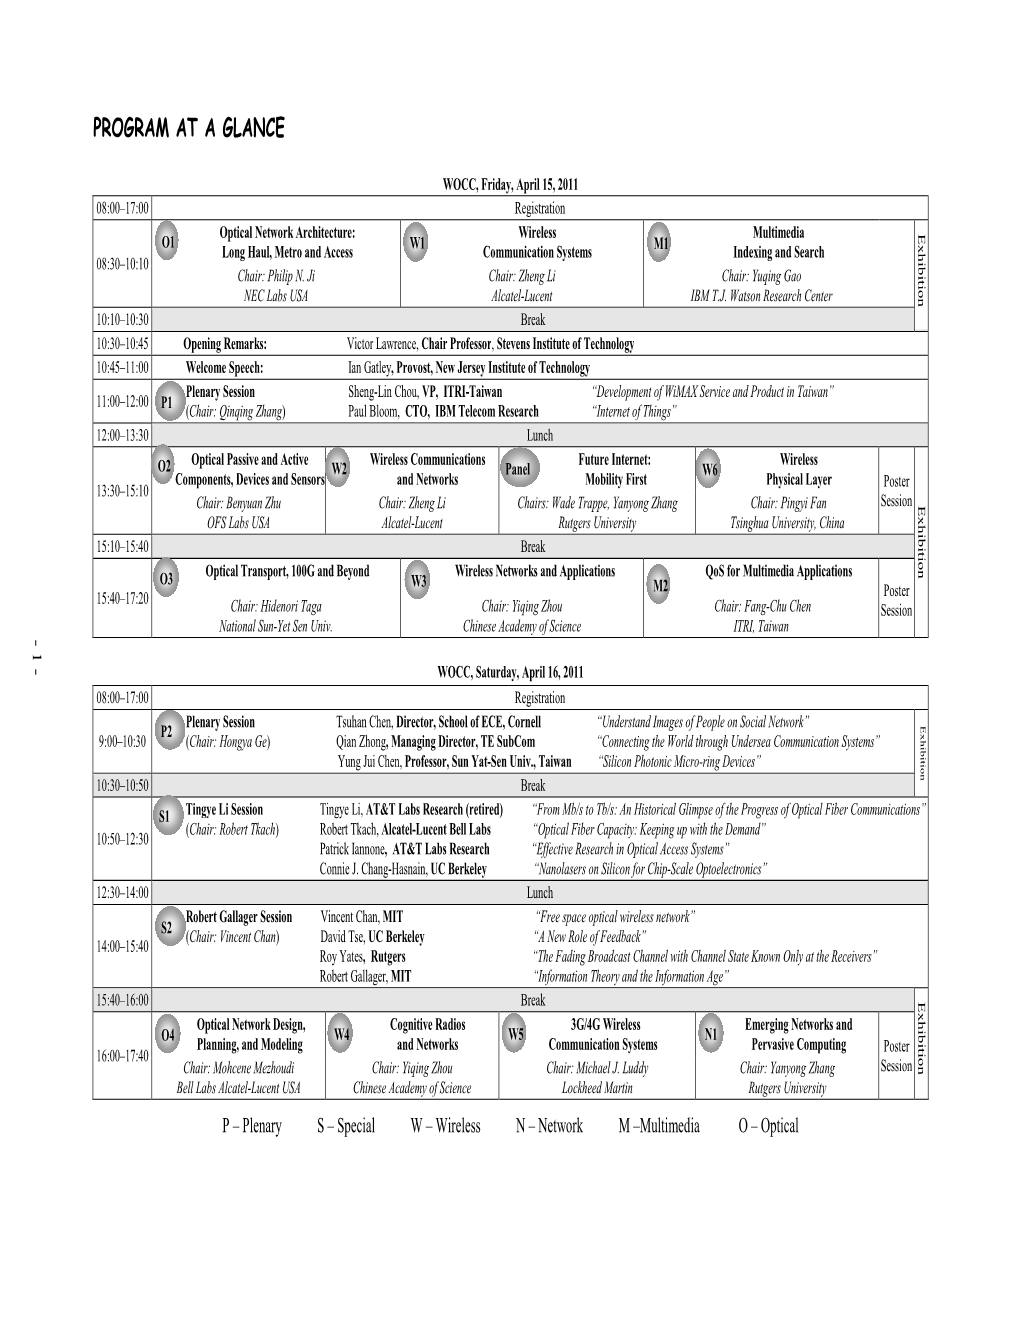 To Download WOCC 2011 Program at a Glance